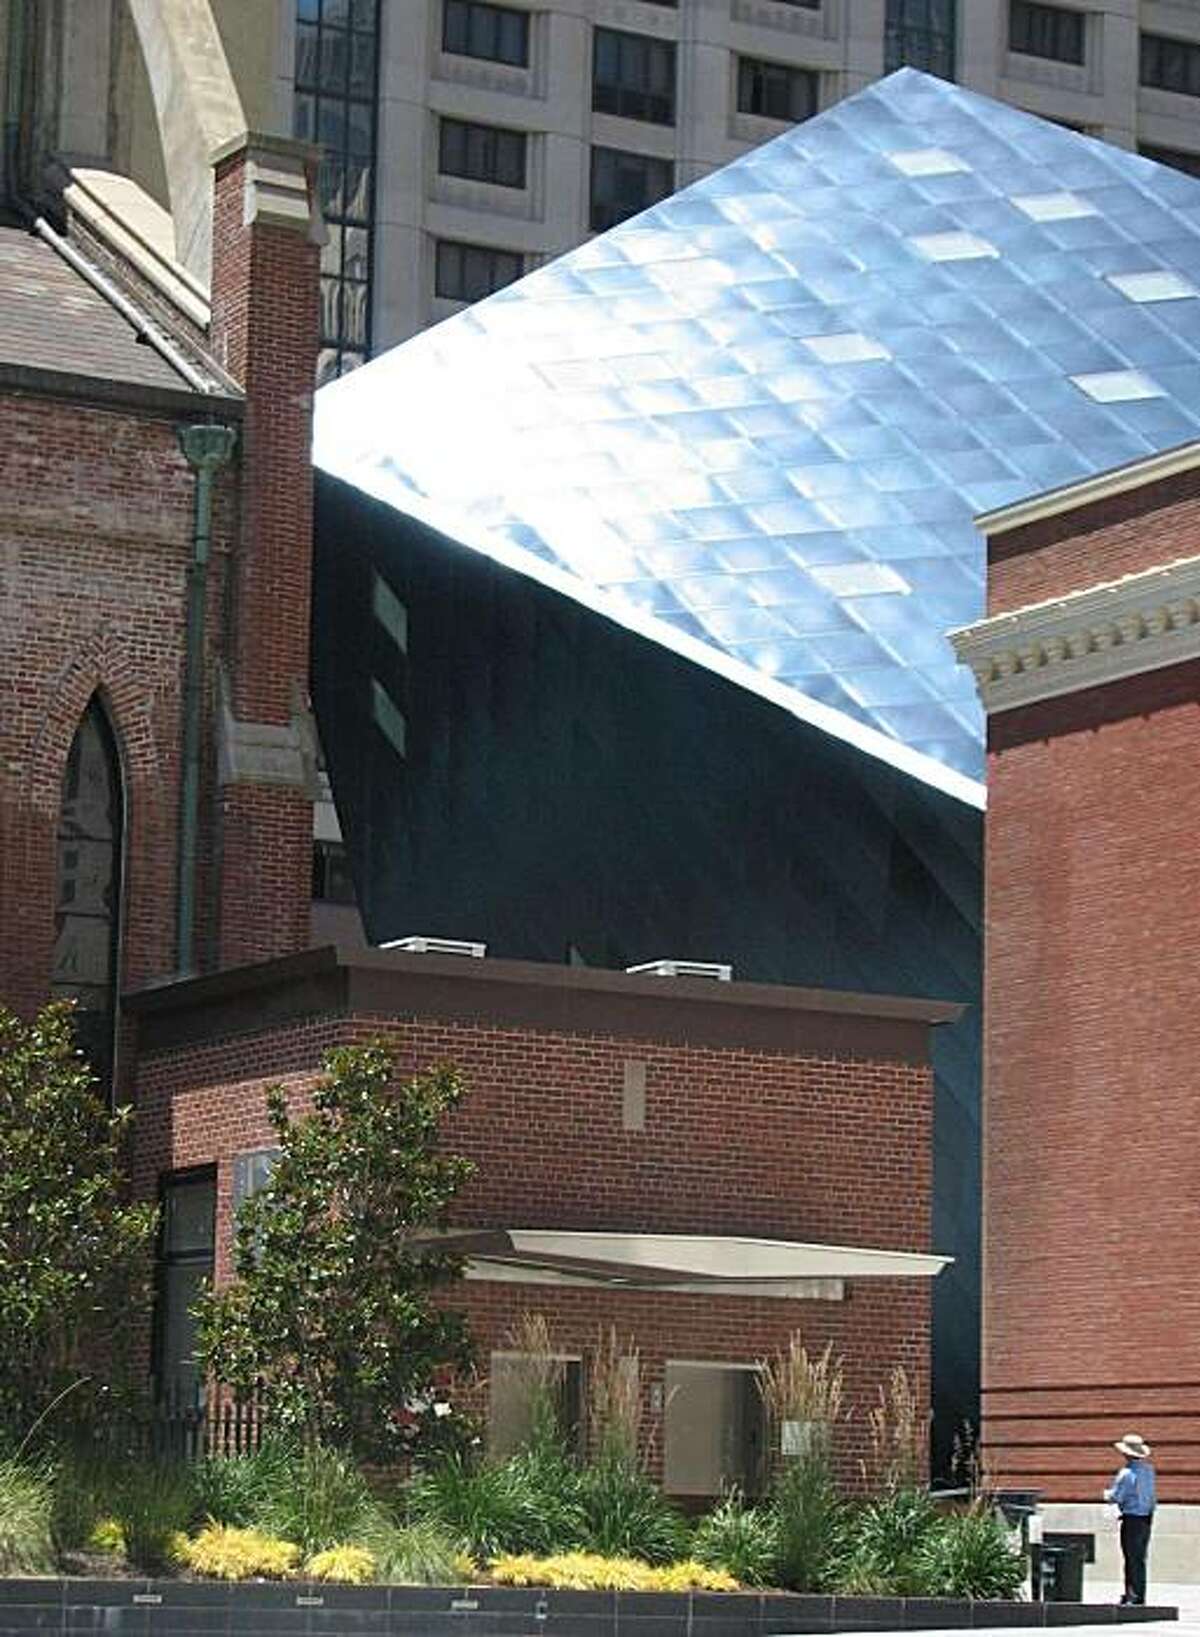 The Contemporary Jewish Museum, a building in San Francisco that shows the old and new can blend.